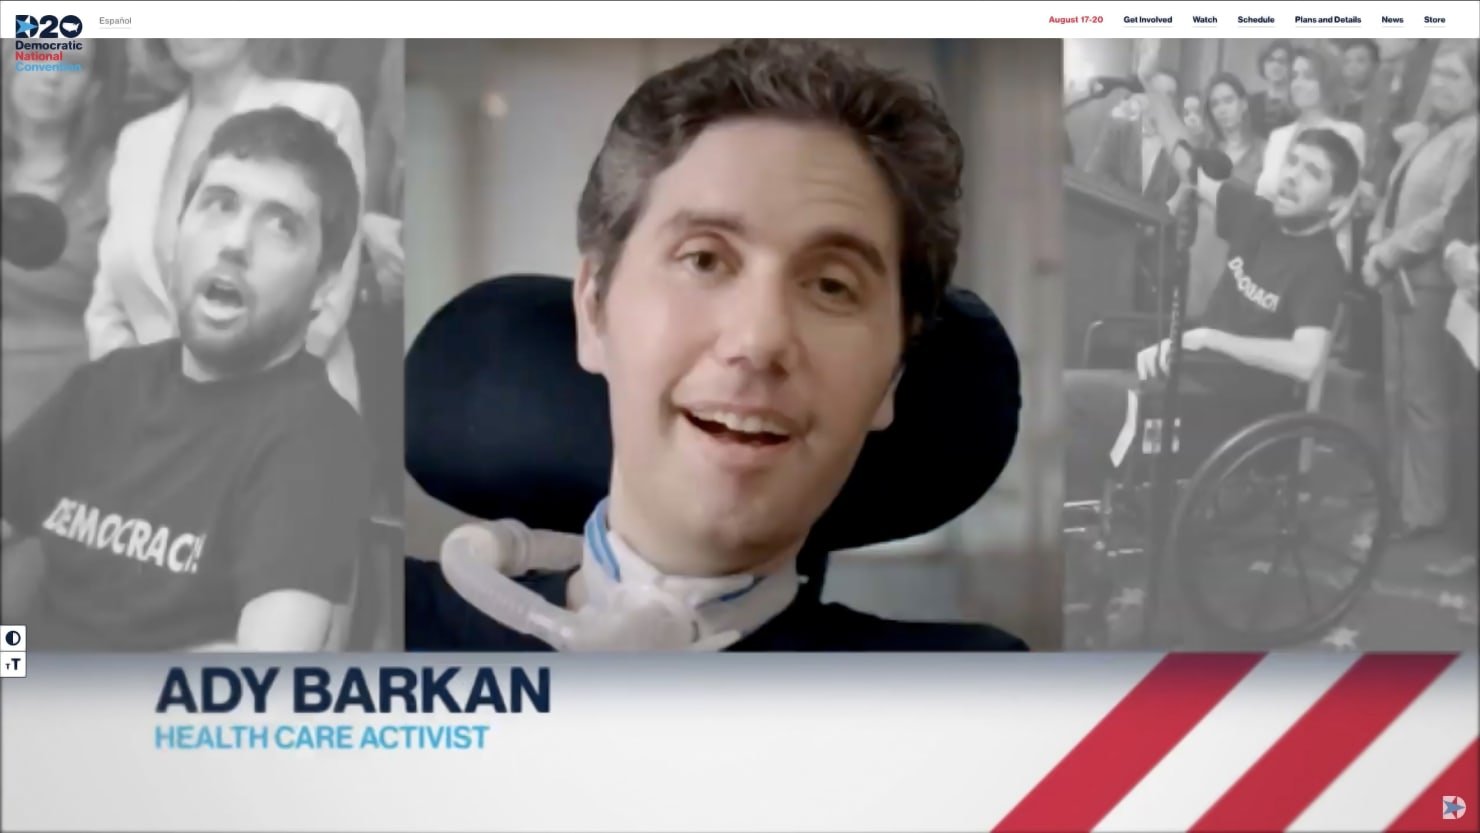 Ady Barkan, A Man Without a Voice, Delivers Most Powerful DNC Speech on Night 2